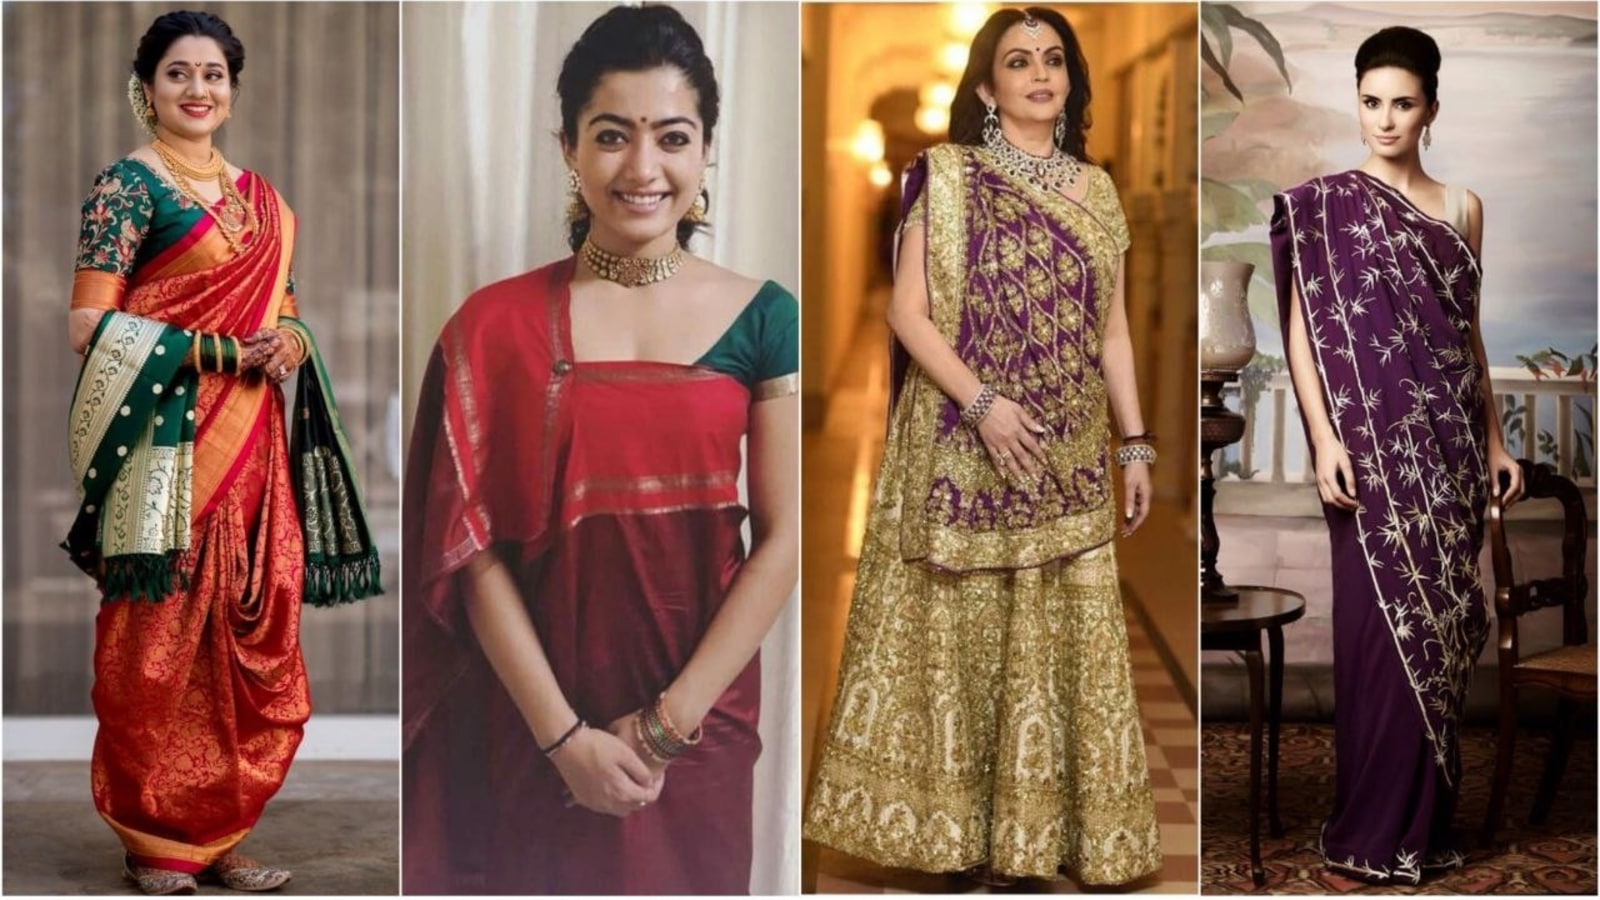 The draping styles to pep up your traditional saree